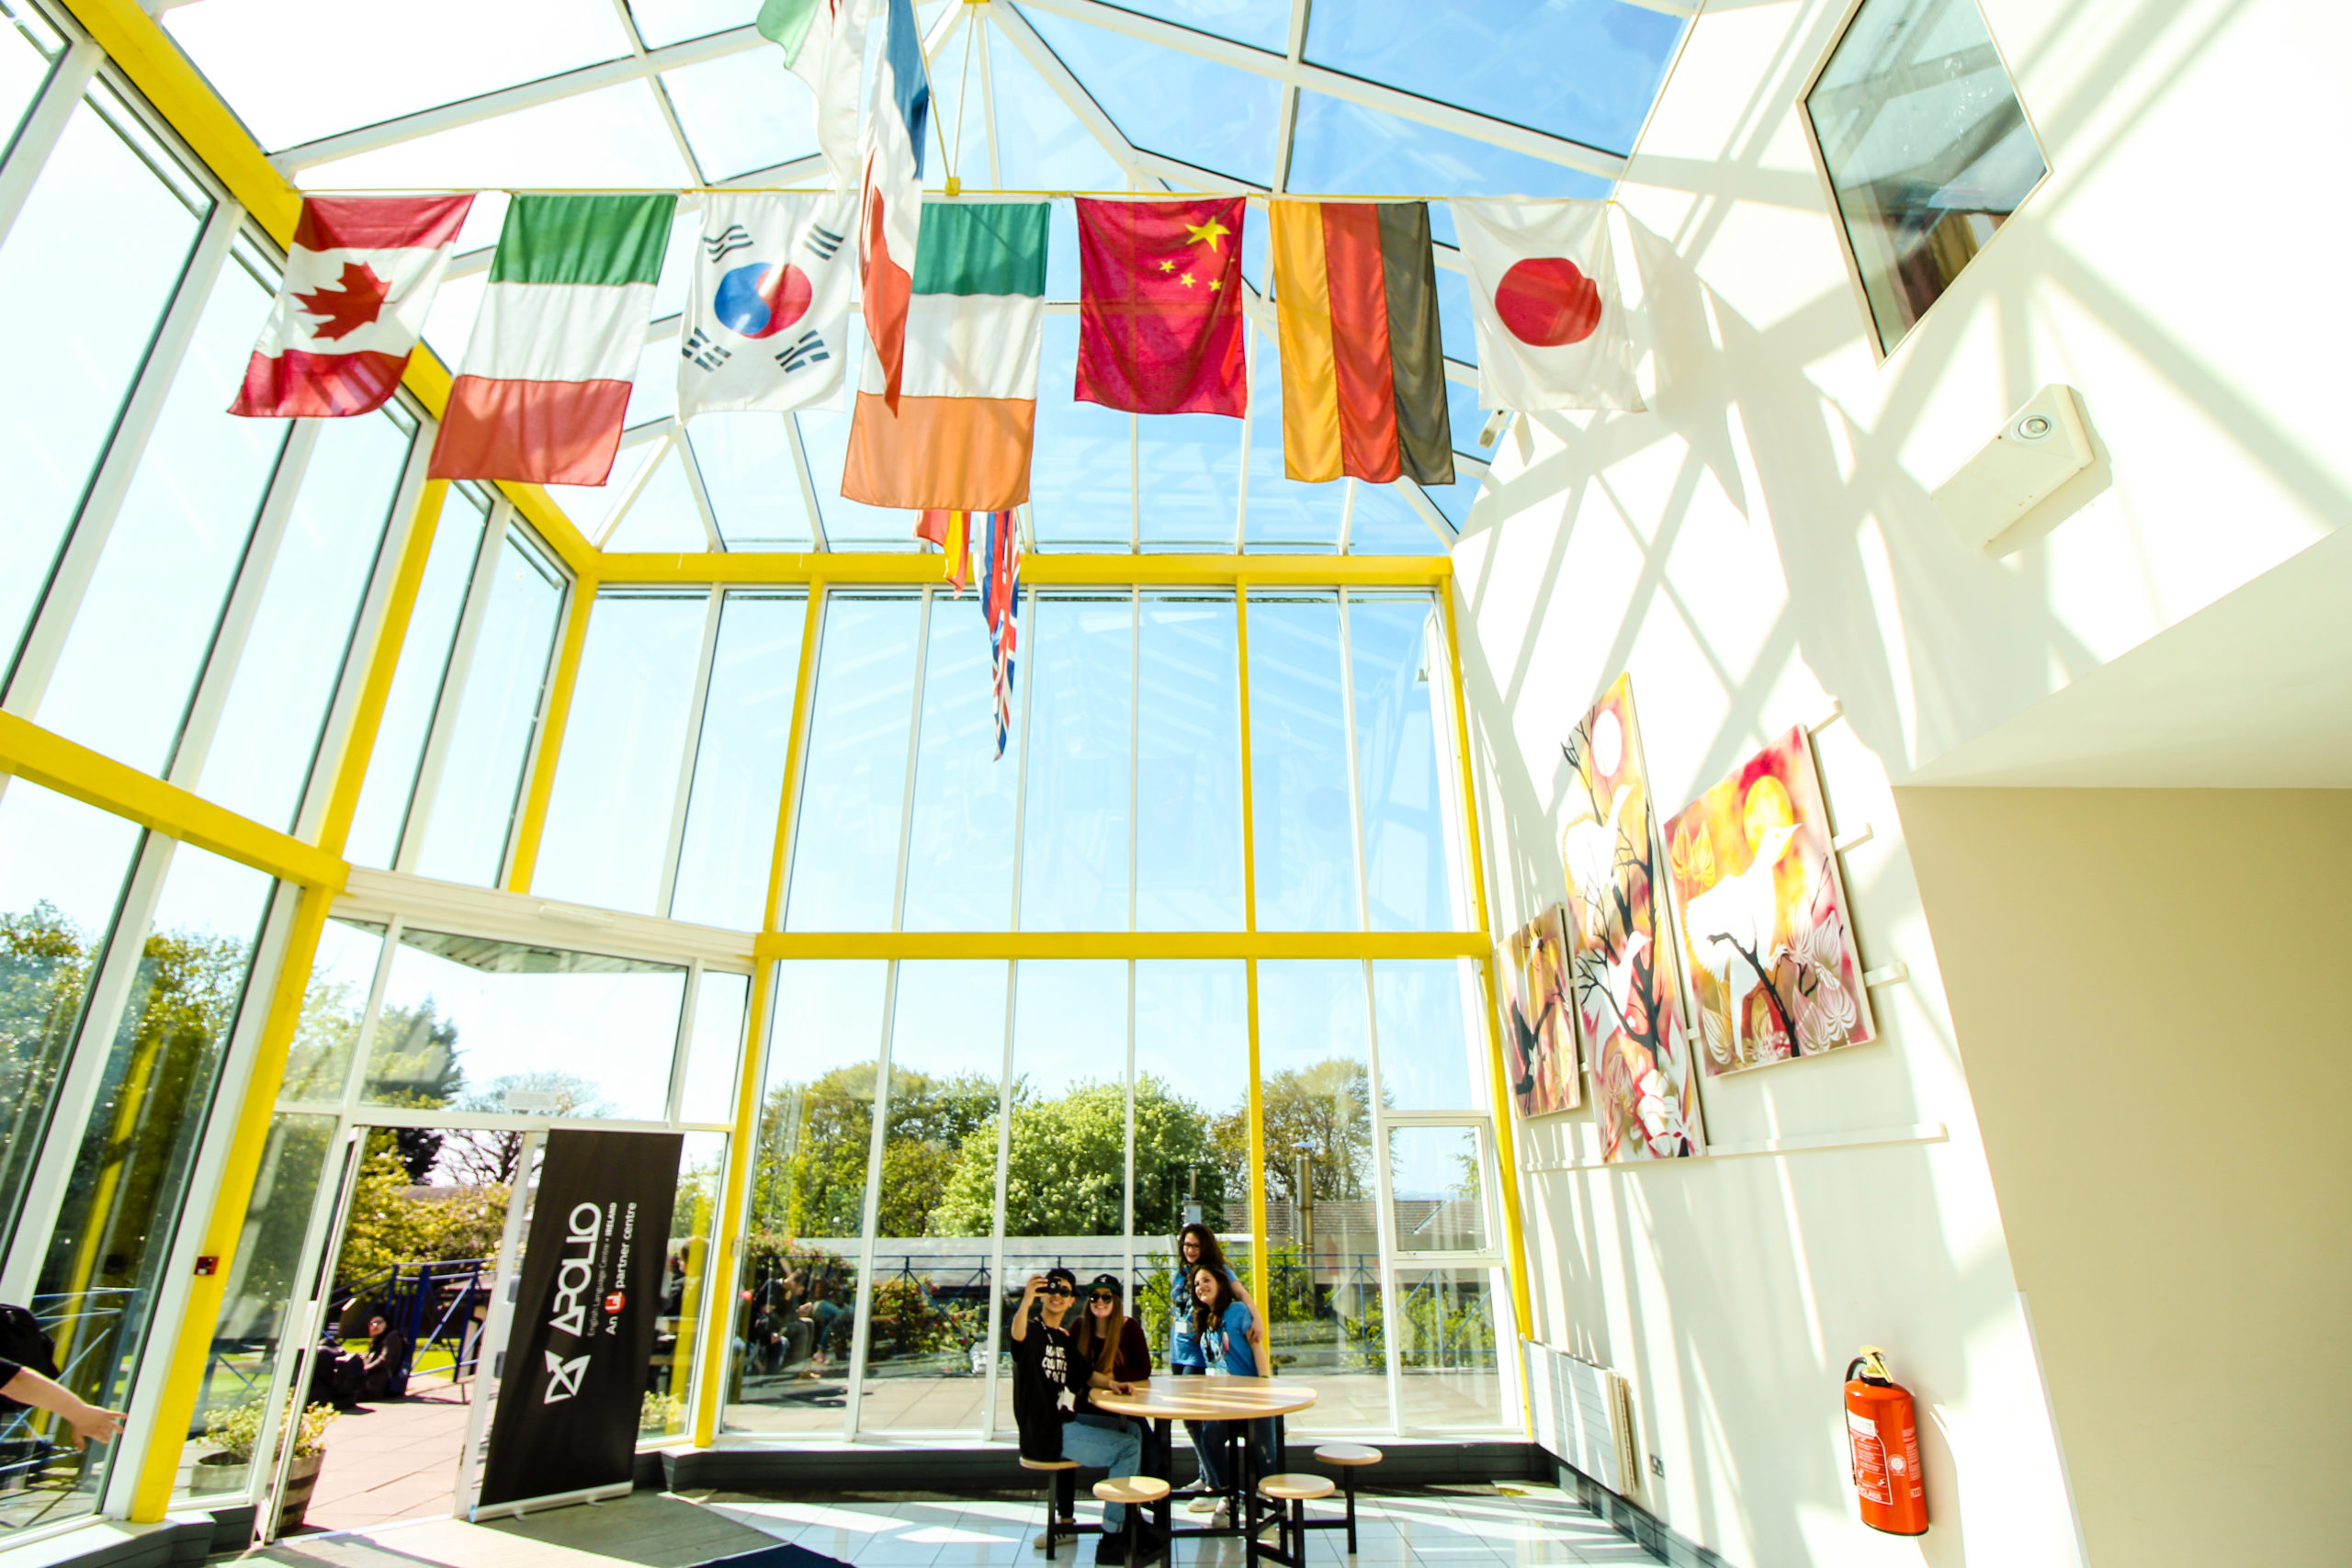 language students in a large spacious conservatory on a sunny day in Apollo language centre with paintings on the walls and flags of different countries hanging from the ceiling